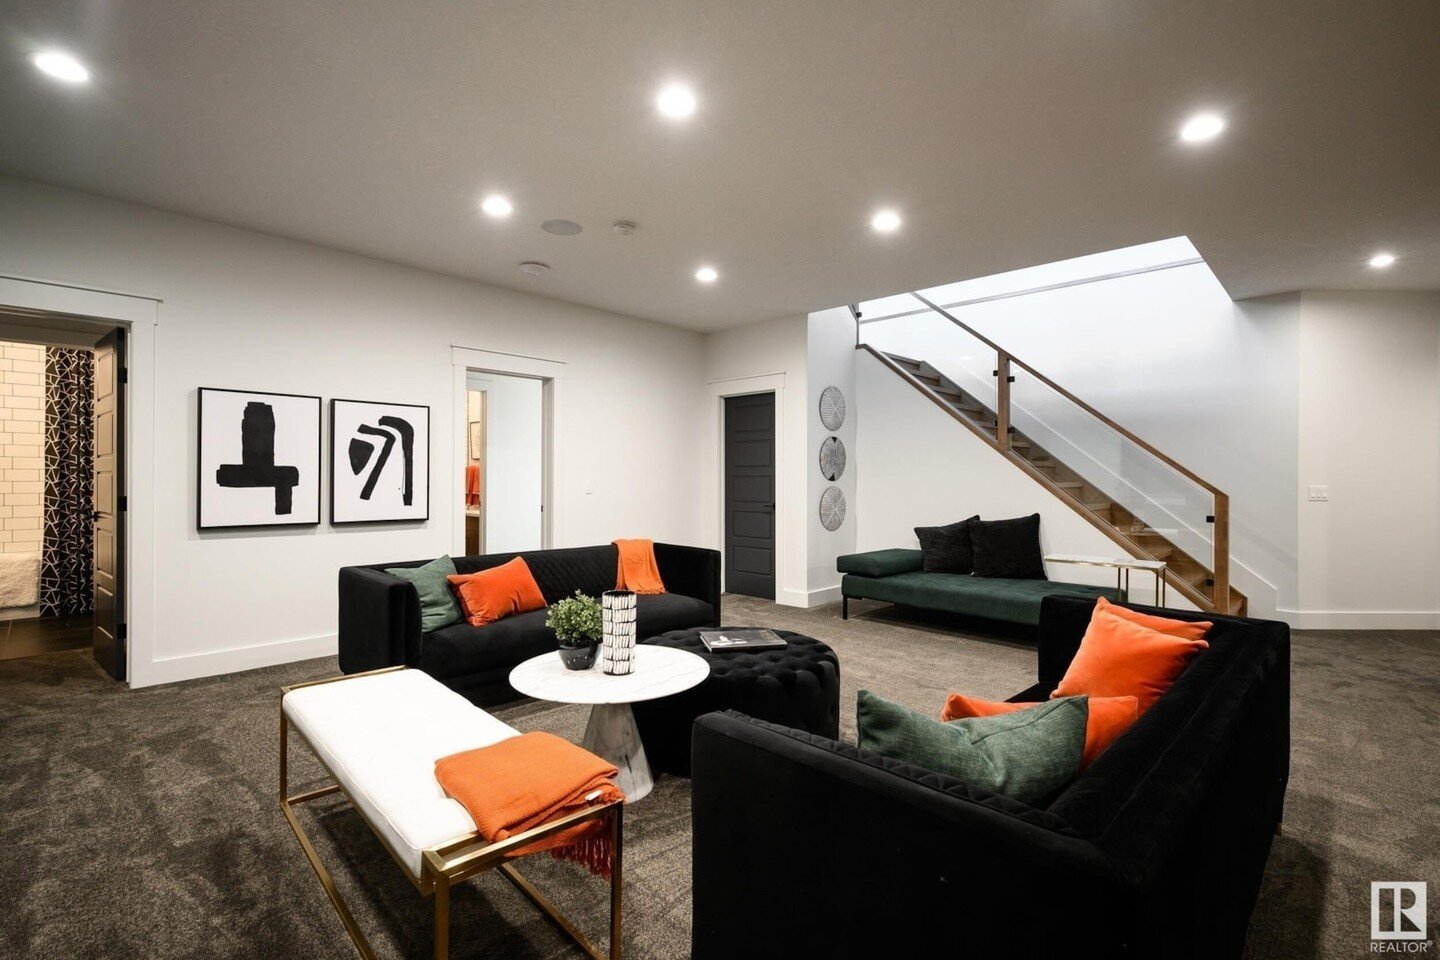 Basements designed for entertainment and the ultimate in family experience. ⁠
⁠
This well-crafted space seamlessly blends comfort and functionality, creating the perfect backdrop for countless memories and lively gatherings.⁠
⁠
Ready to craft your cu